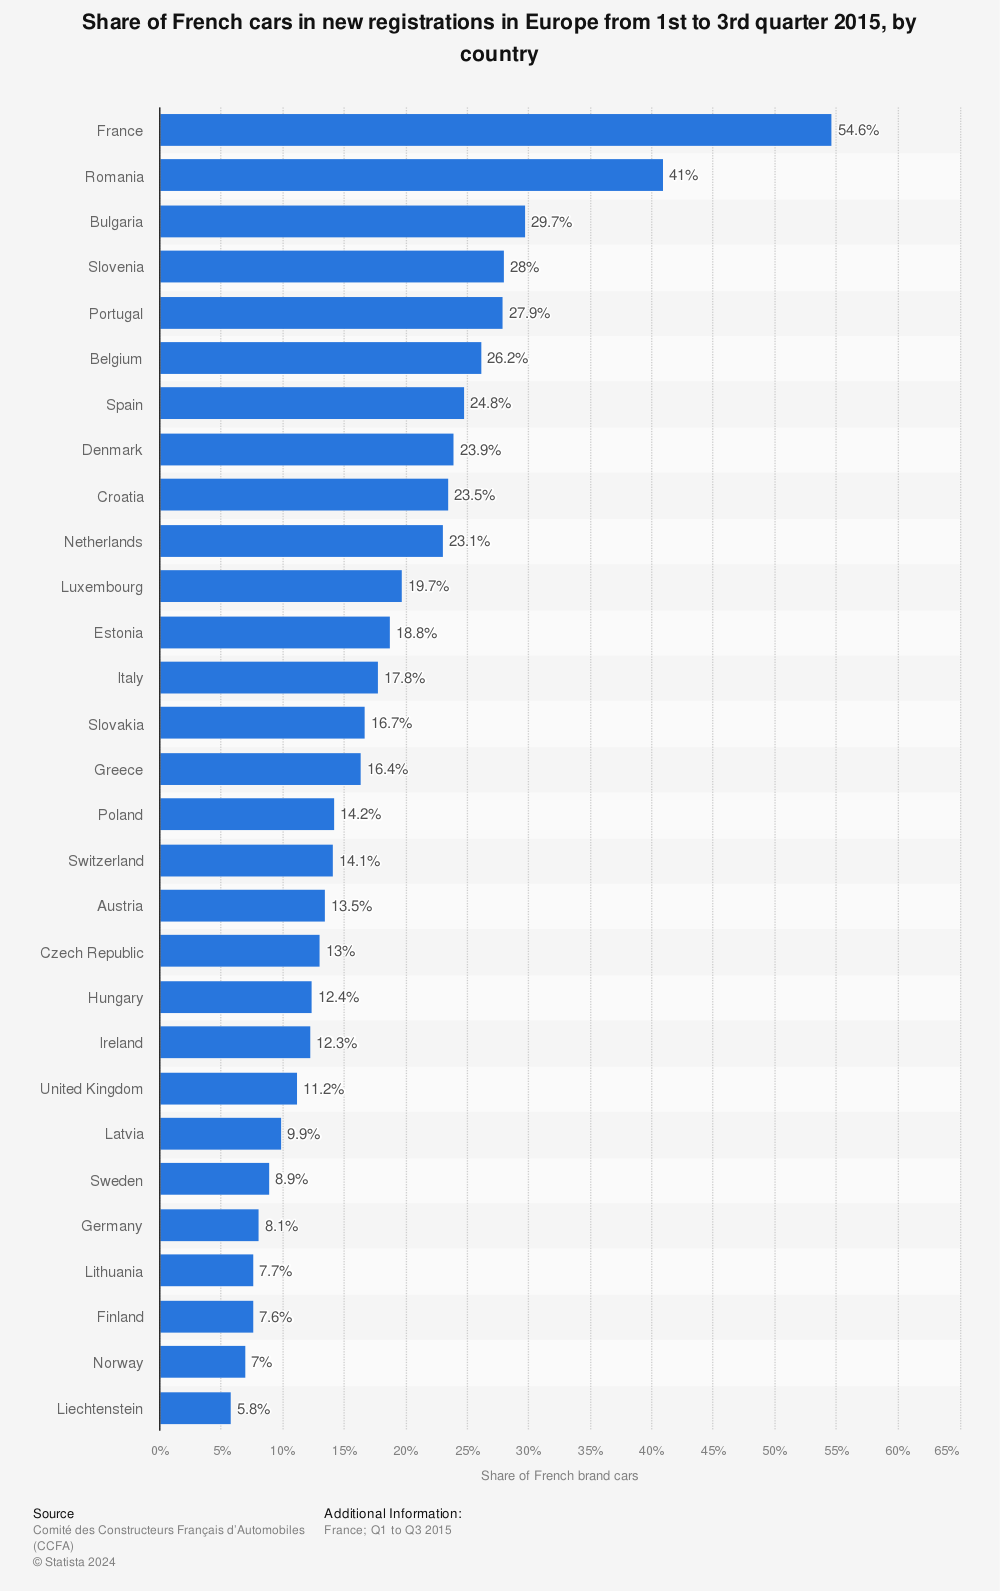 Statistic: Share of French cars in new registrations in Europe from 1st to 3rd quarter 2015, by country | Statista